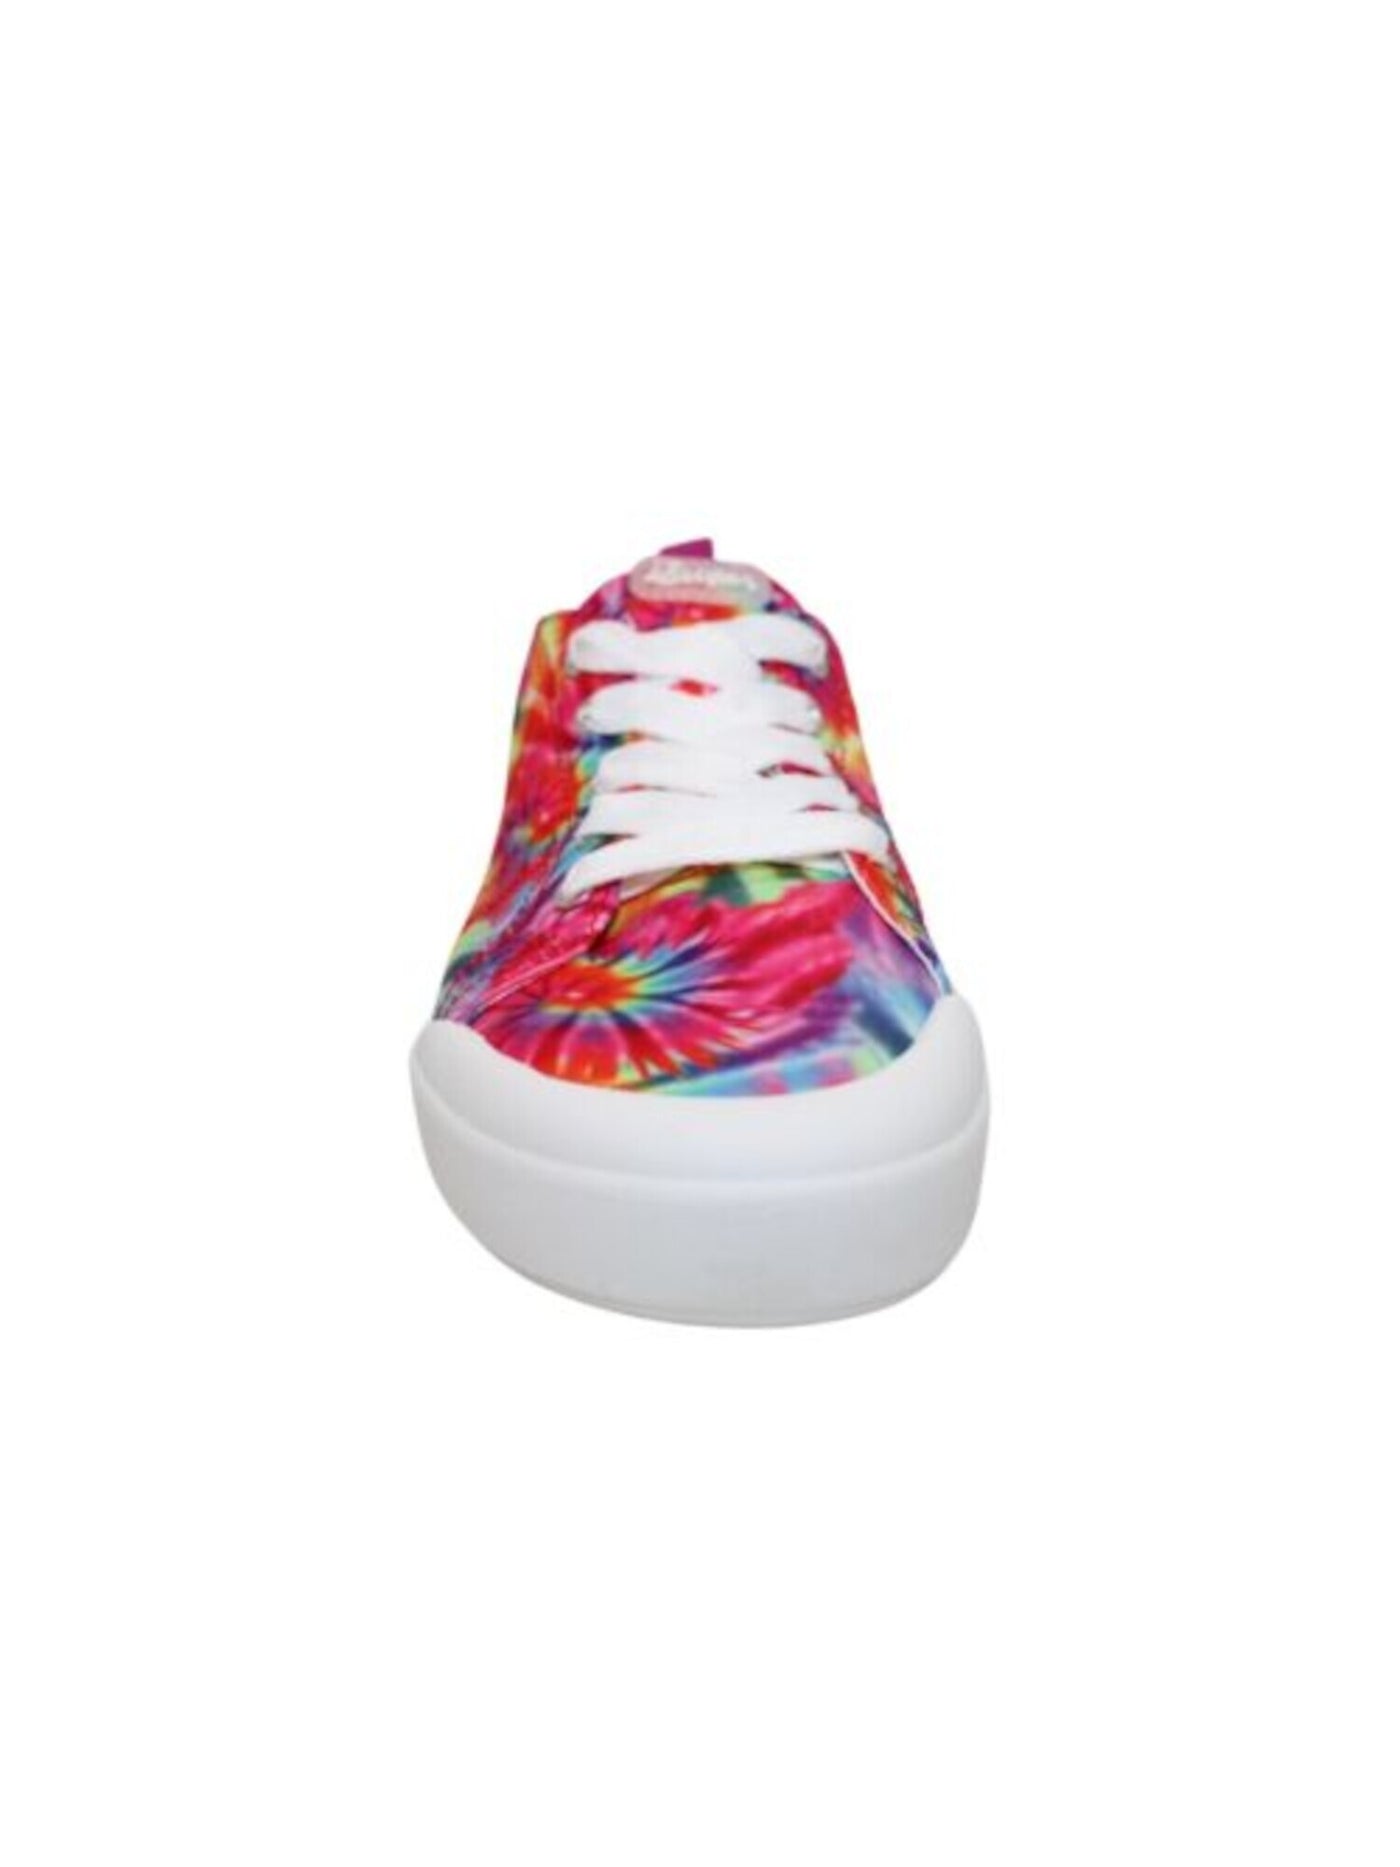 SUGAR Womens Pink Tie Dye Cushioned Festival Round Toe Platform Lace-Up Athletic Sneakers Shoes 10 M